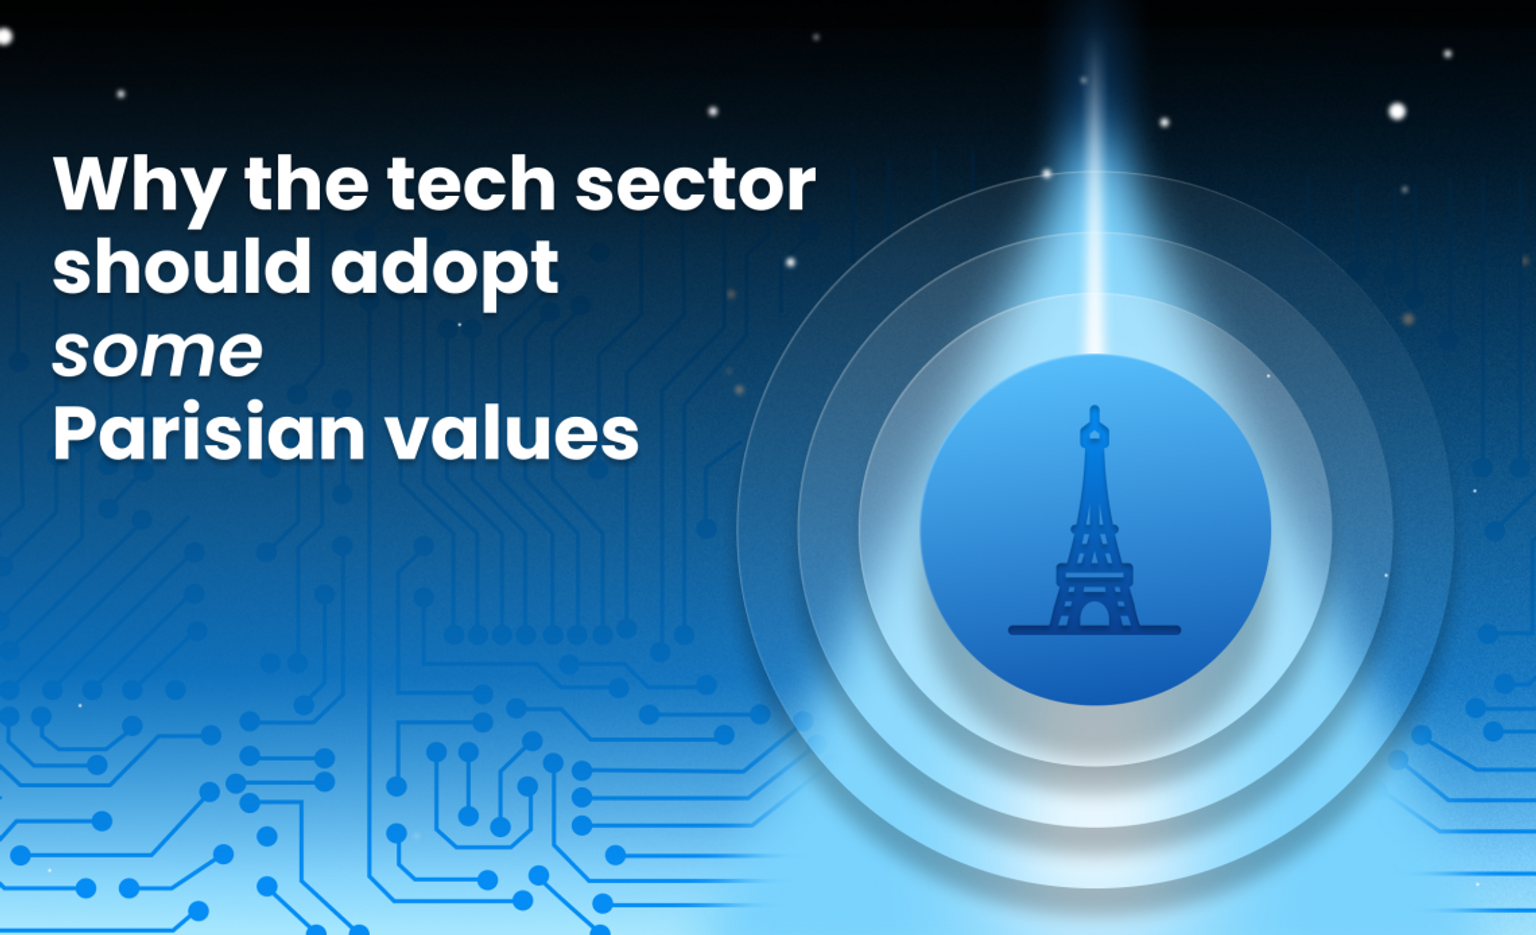 Why the tech sector should adopt (some) Parisian values